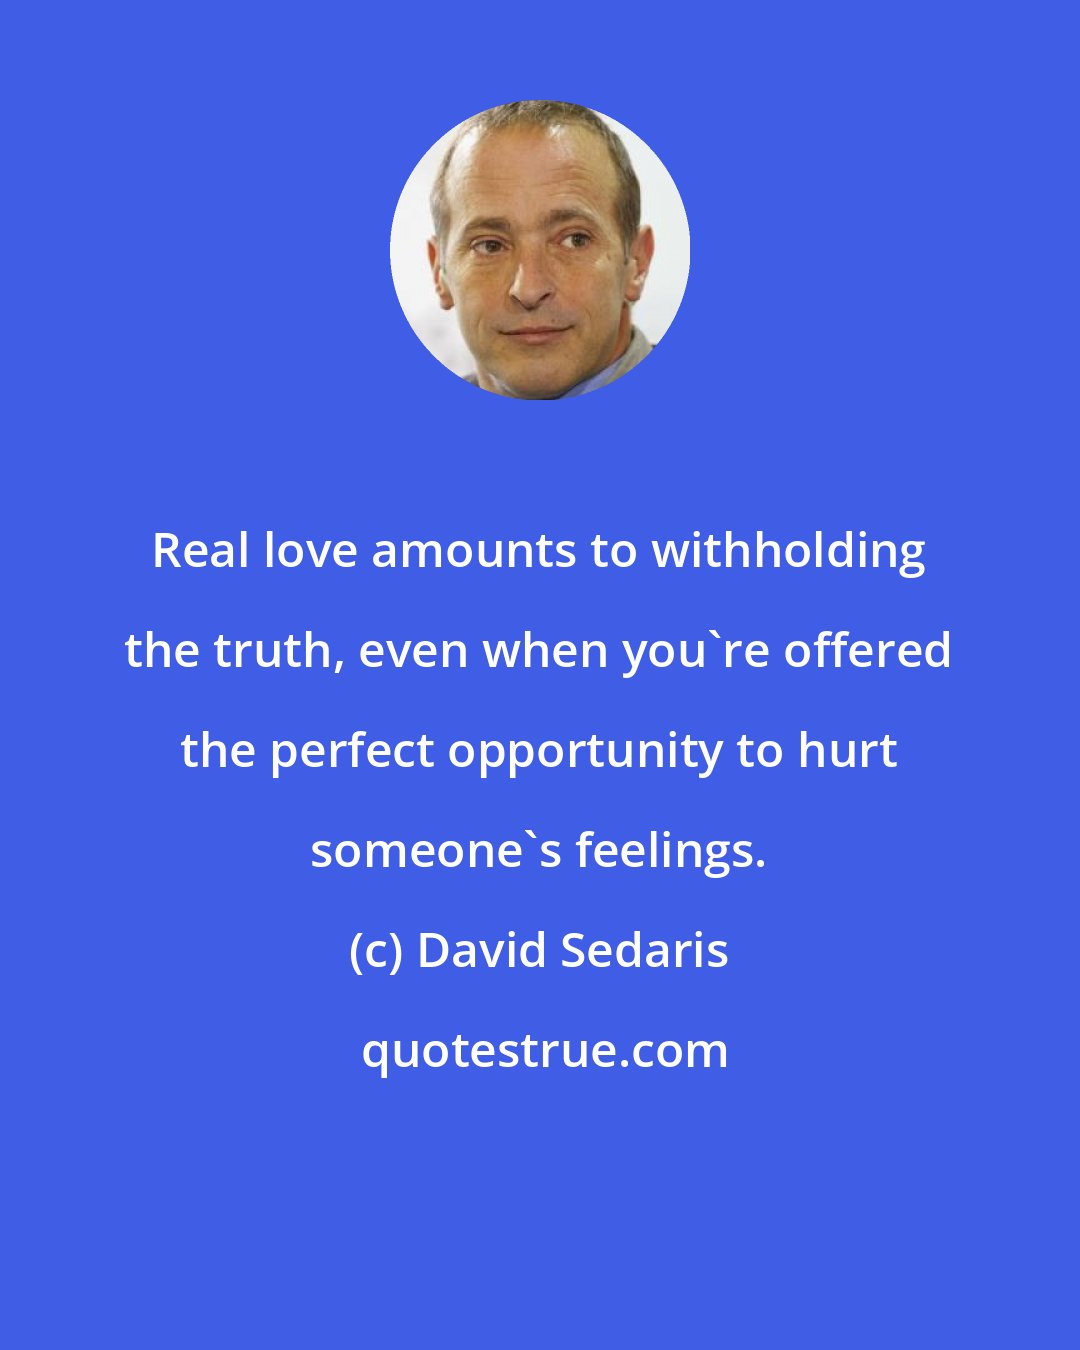 David Sedaris: Real love amounts to withholding the truth, even when you're offered the perfect opportunity to hurt someone's feelings.